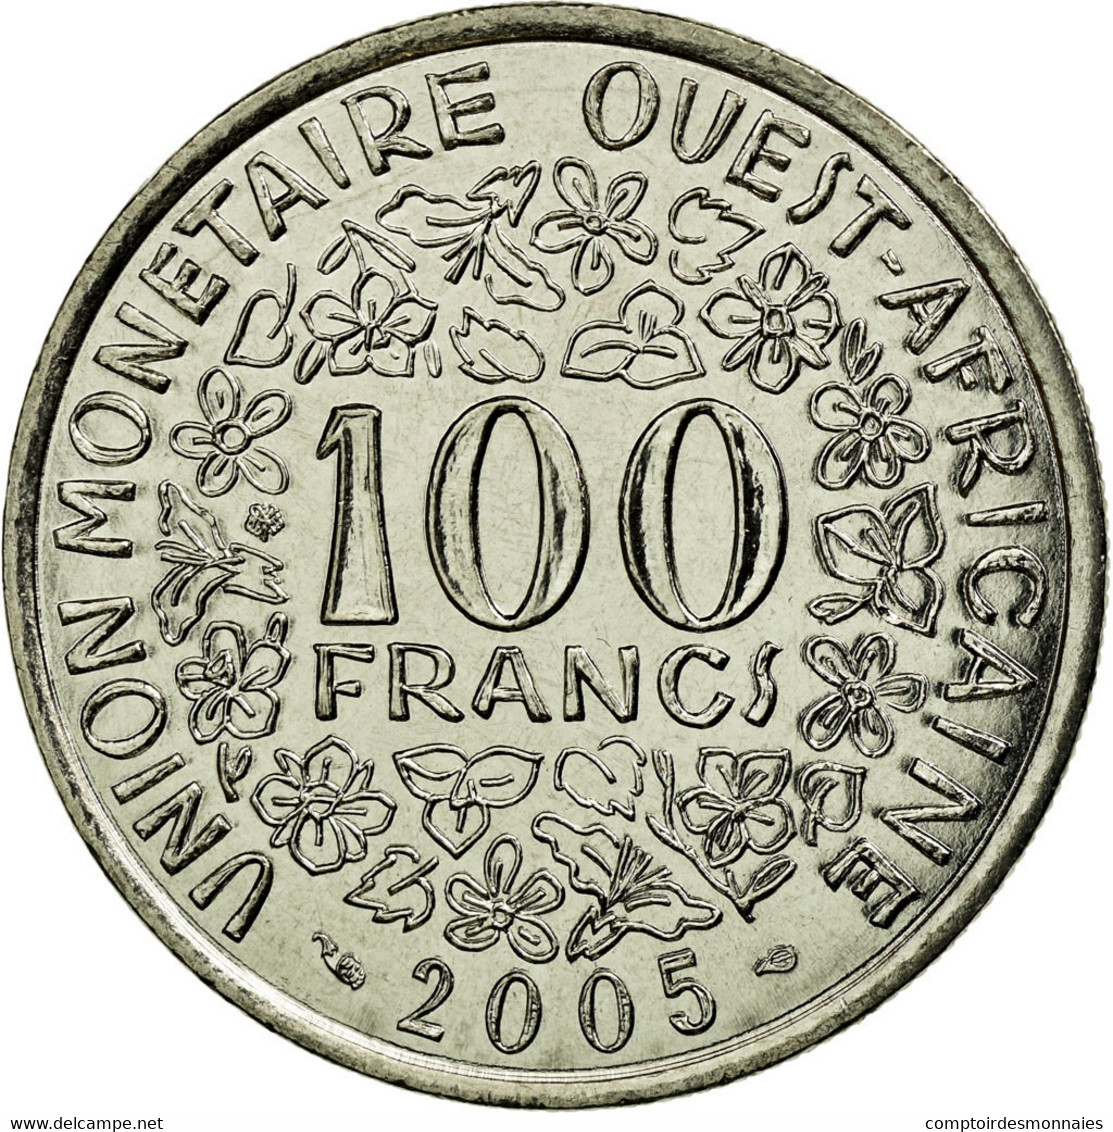 Monnaie, West African States, 100 Francs, 2005, SUP, Nickel, KM:4 - Ivory Coast